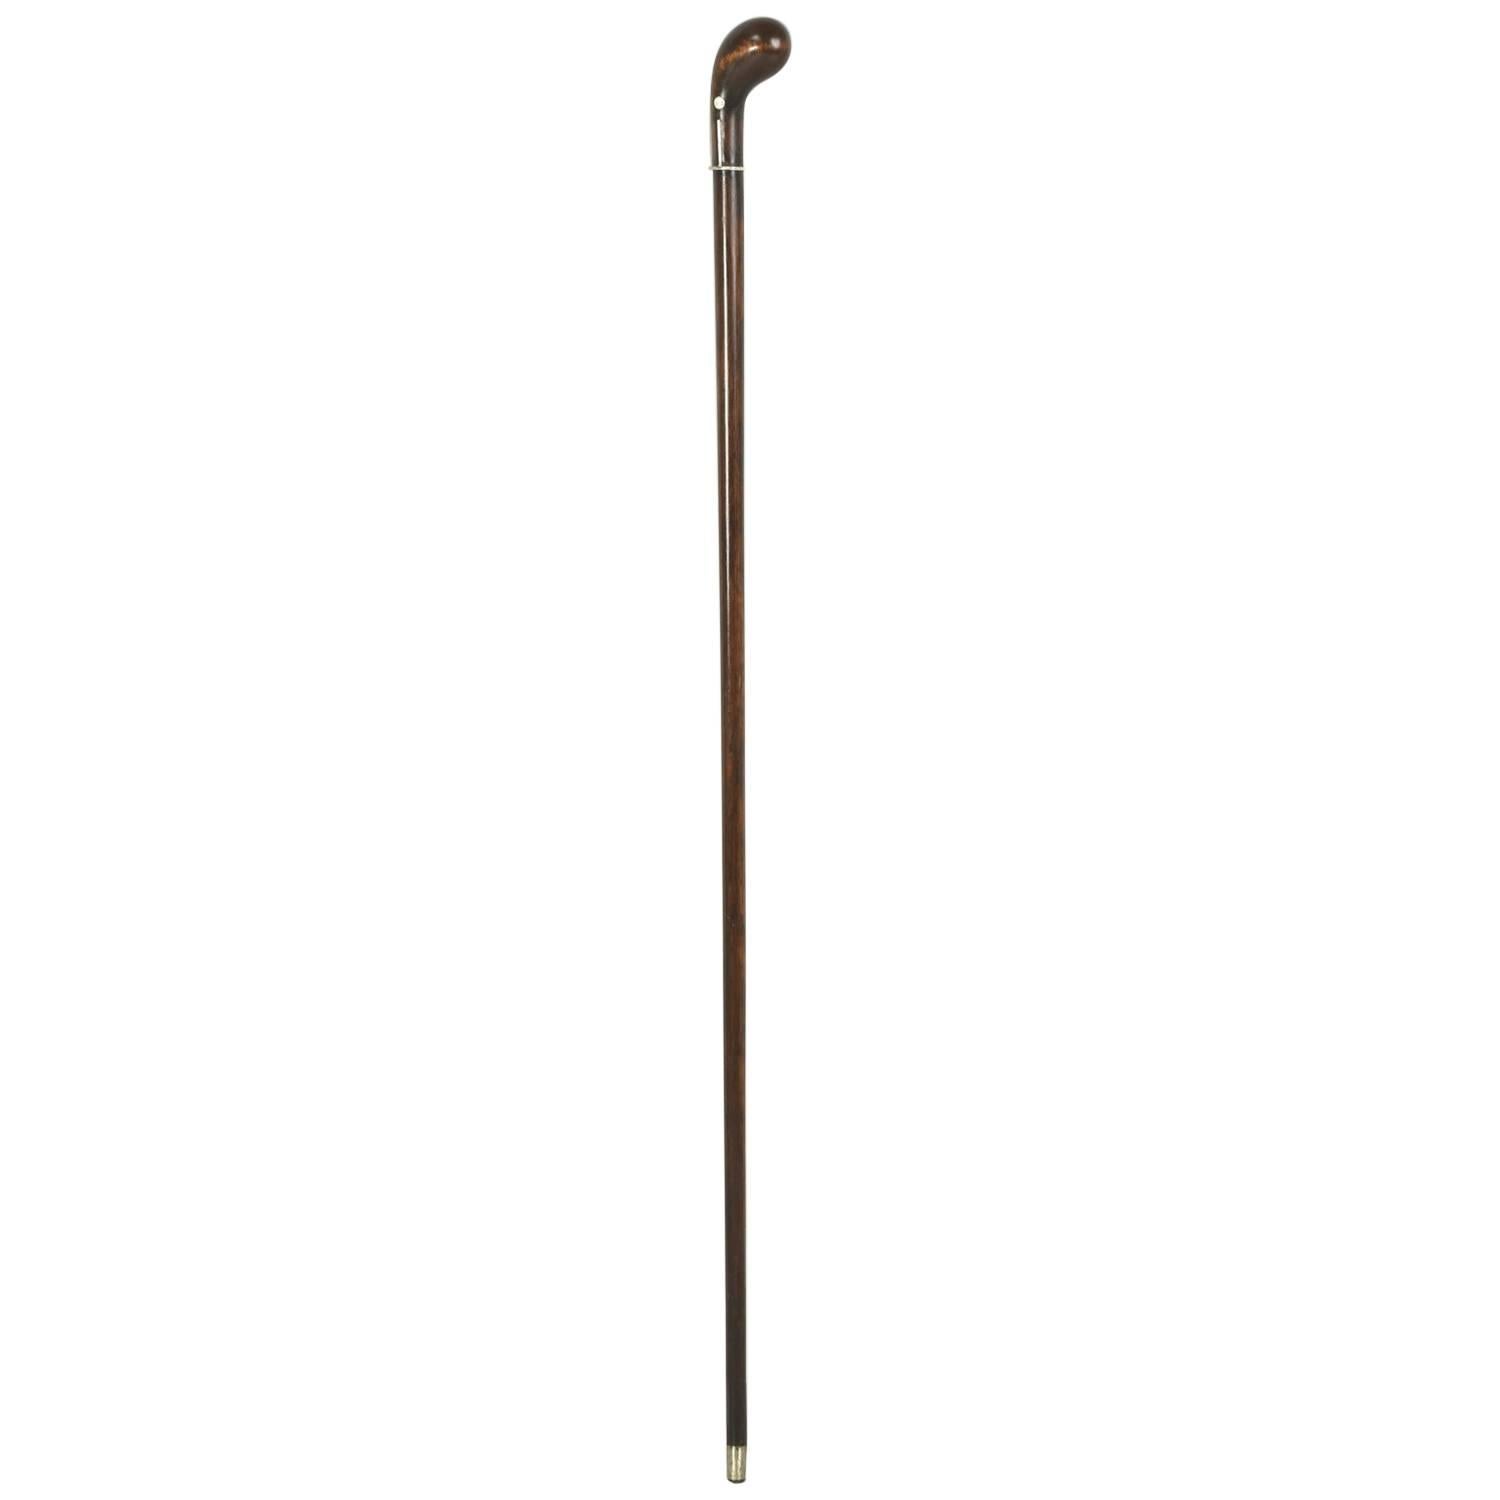 Antique French Walking Stick, or Cane with Silver Inlays